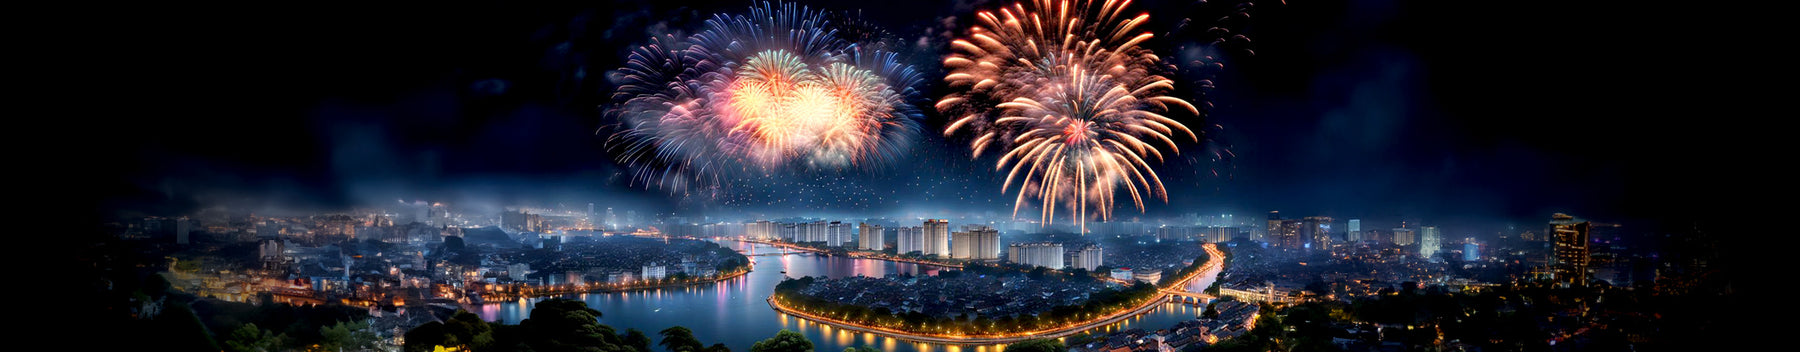 Hanoi Set to Celebrate 70th Liberation Day with Fireworks & More